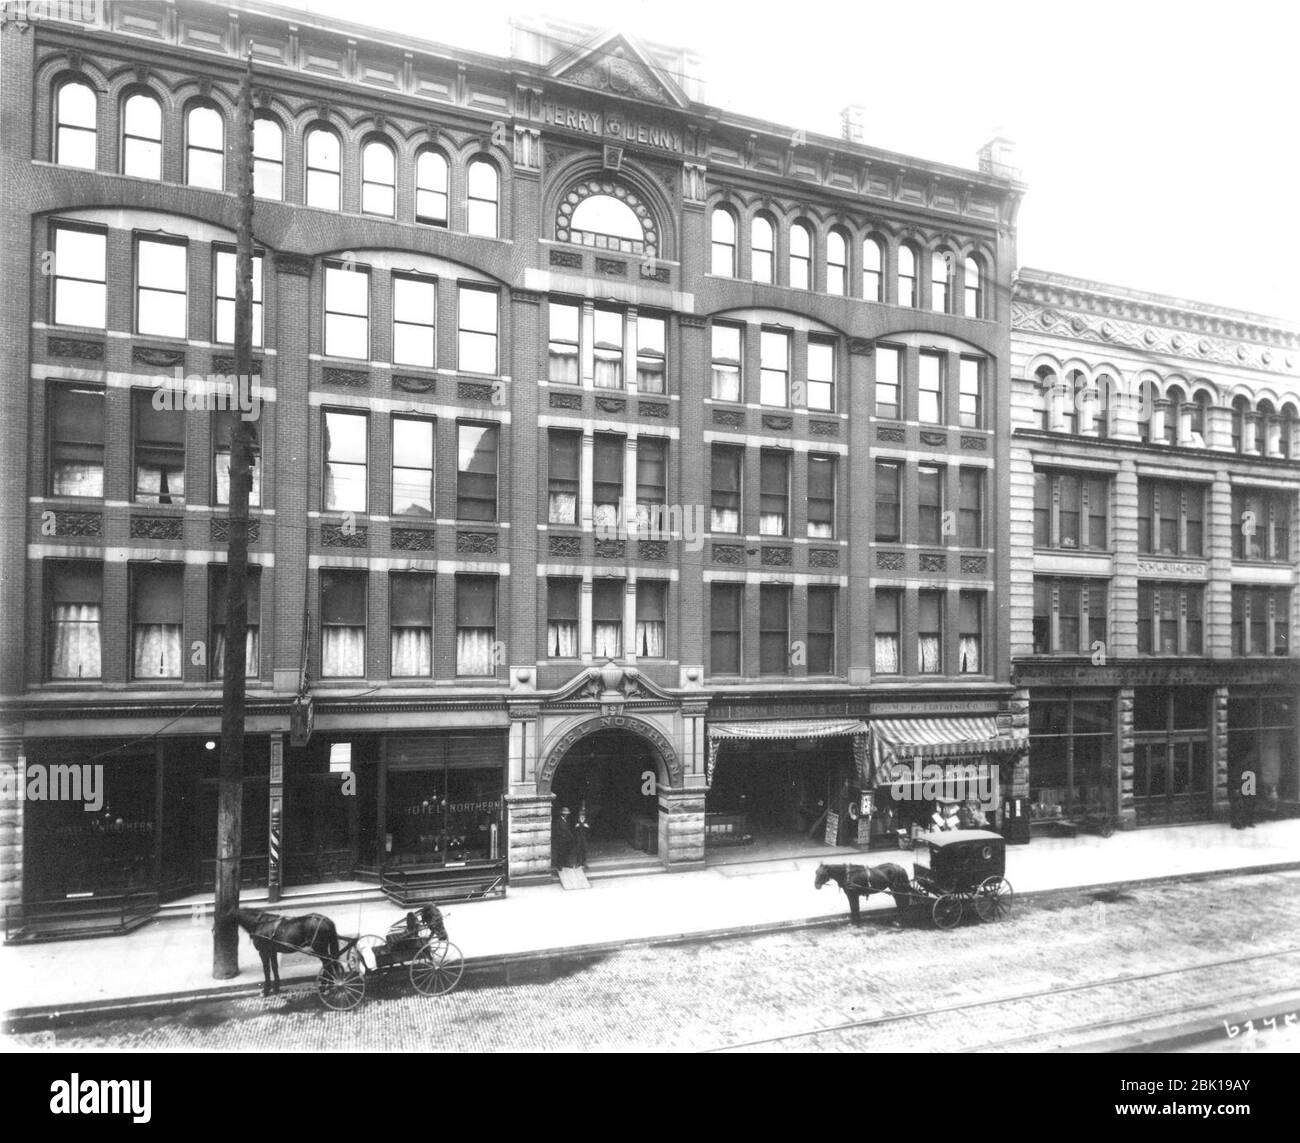 Hotel Northern, situato nel Terry-Denny Building, 109-115 1st Ave S, tra Yesler Way e Washington St, Seattle, ca 1905 (CURTIS 2066). Foto Stock